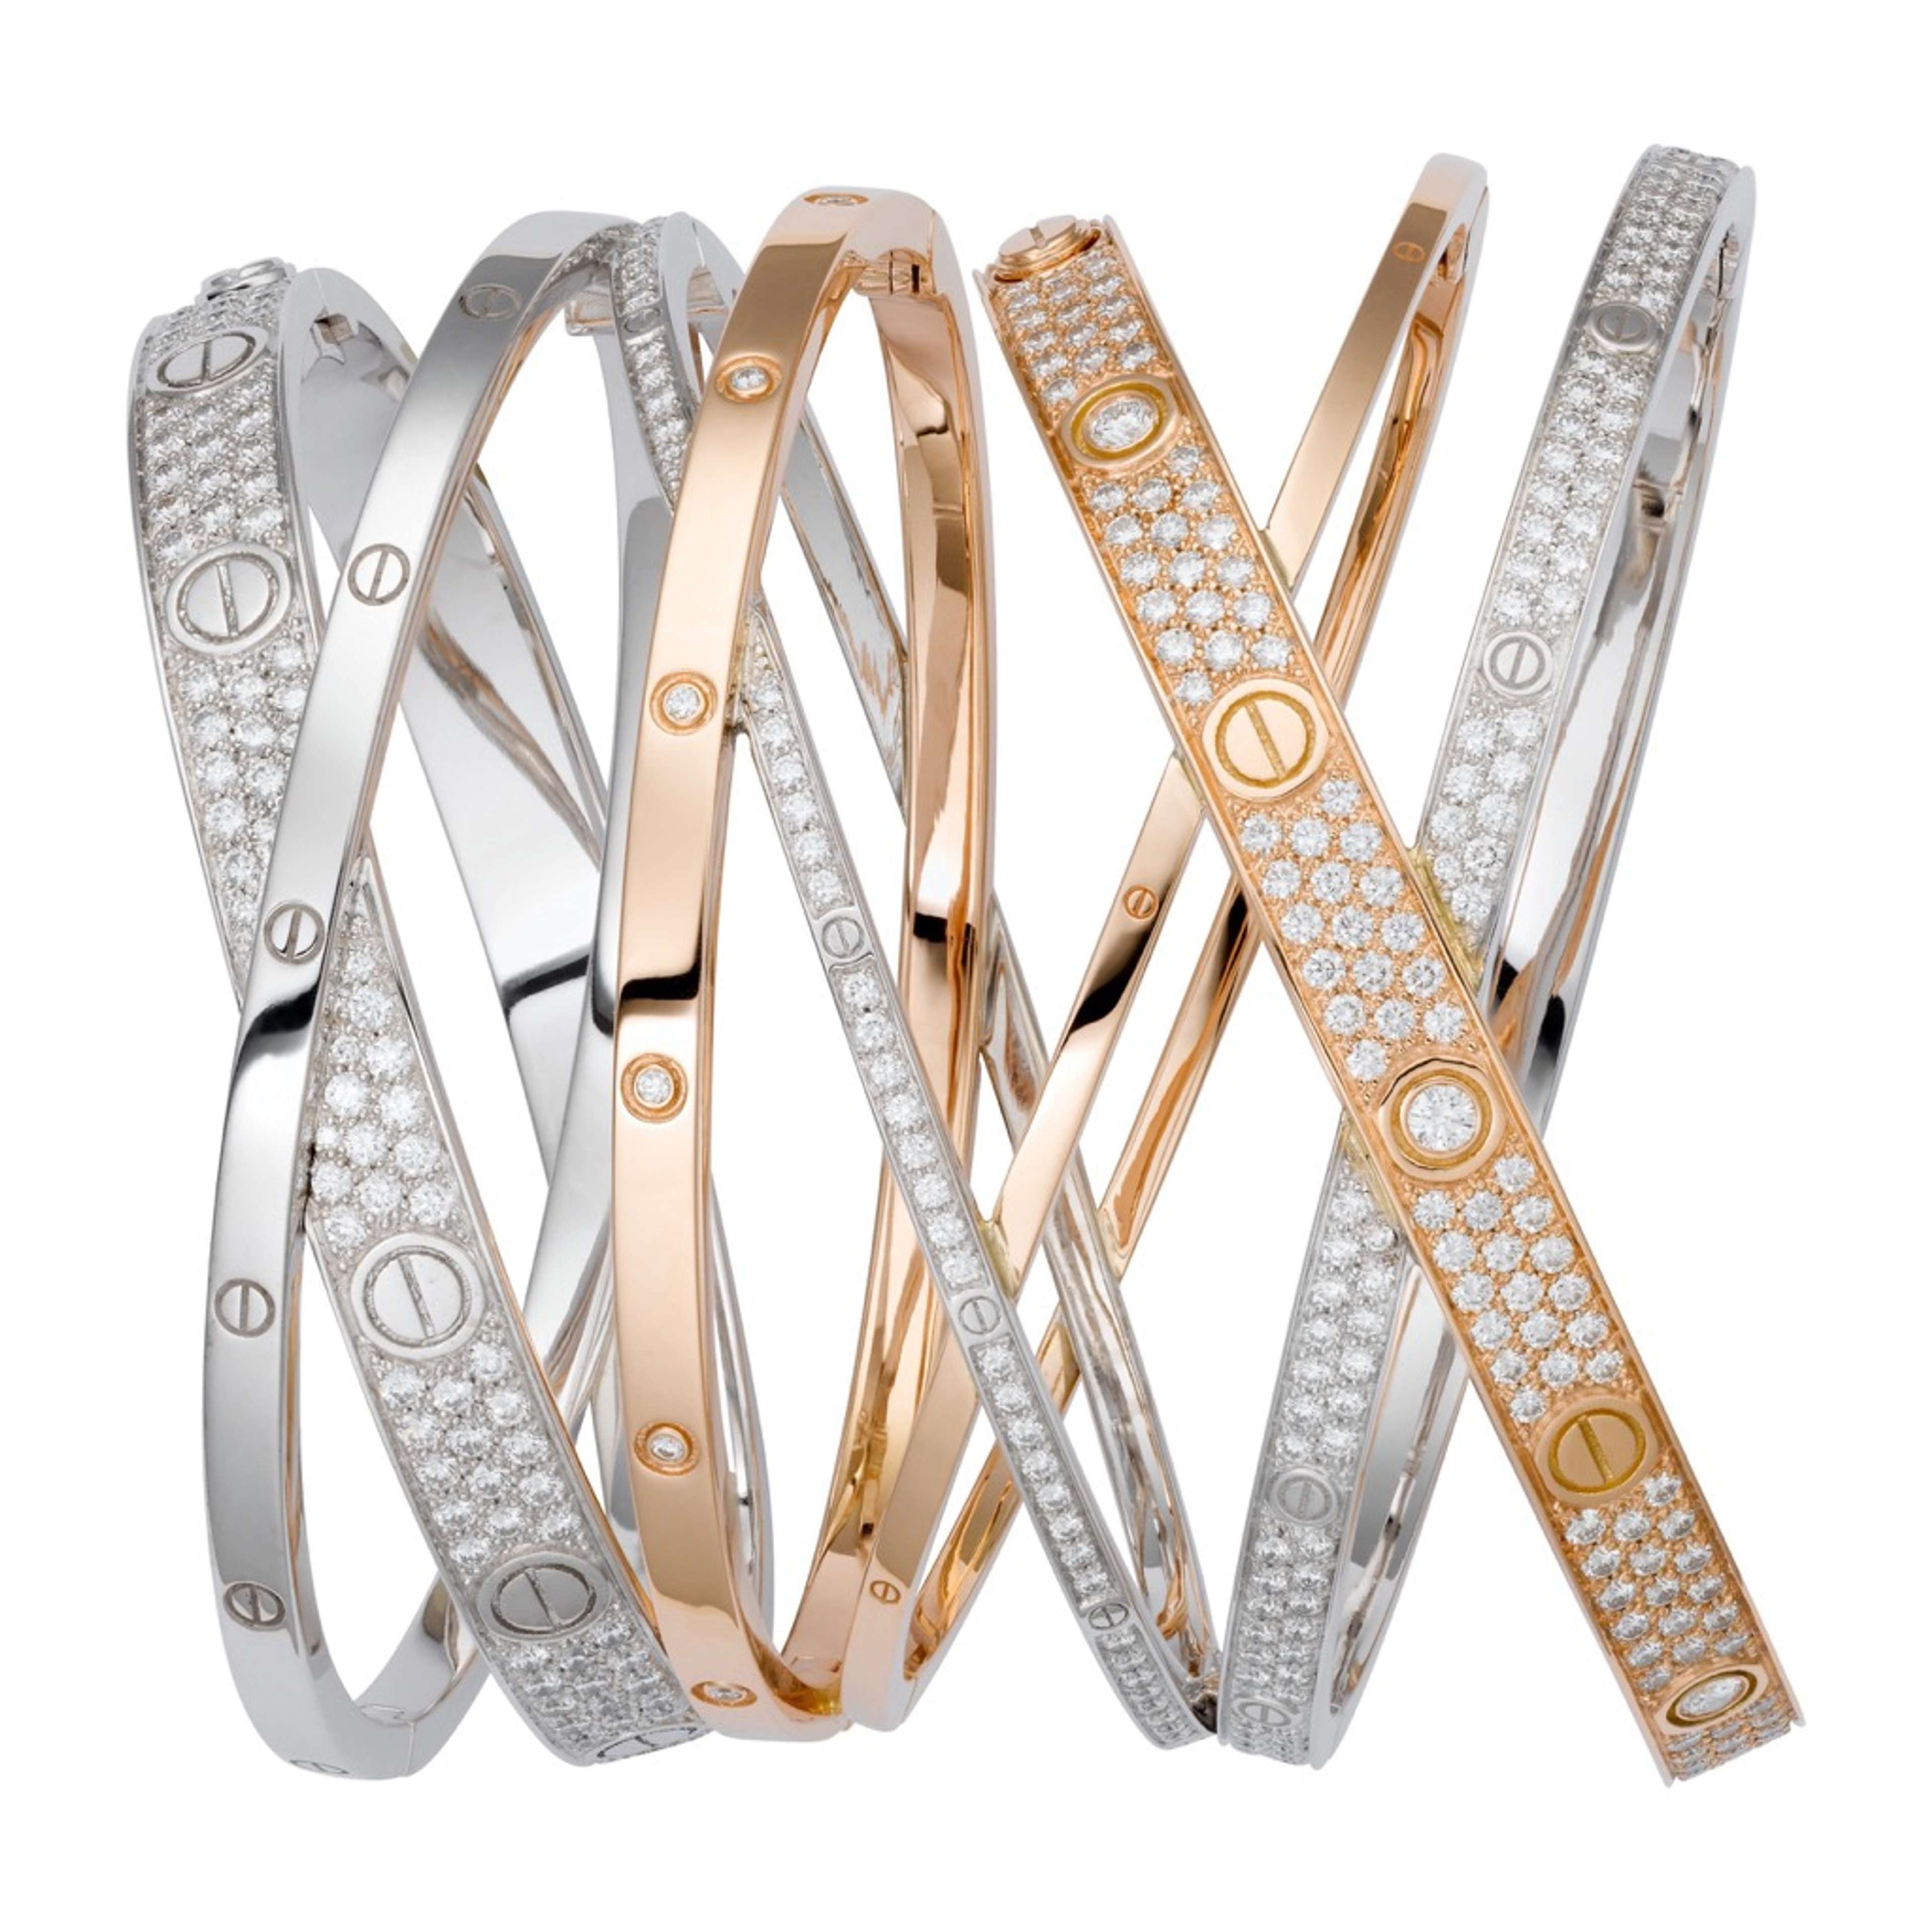 An image of several models of Cartier’s Love bracelets intertwined